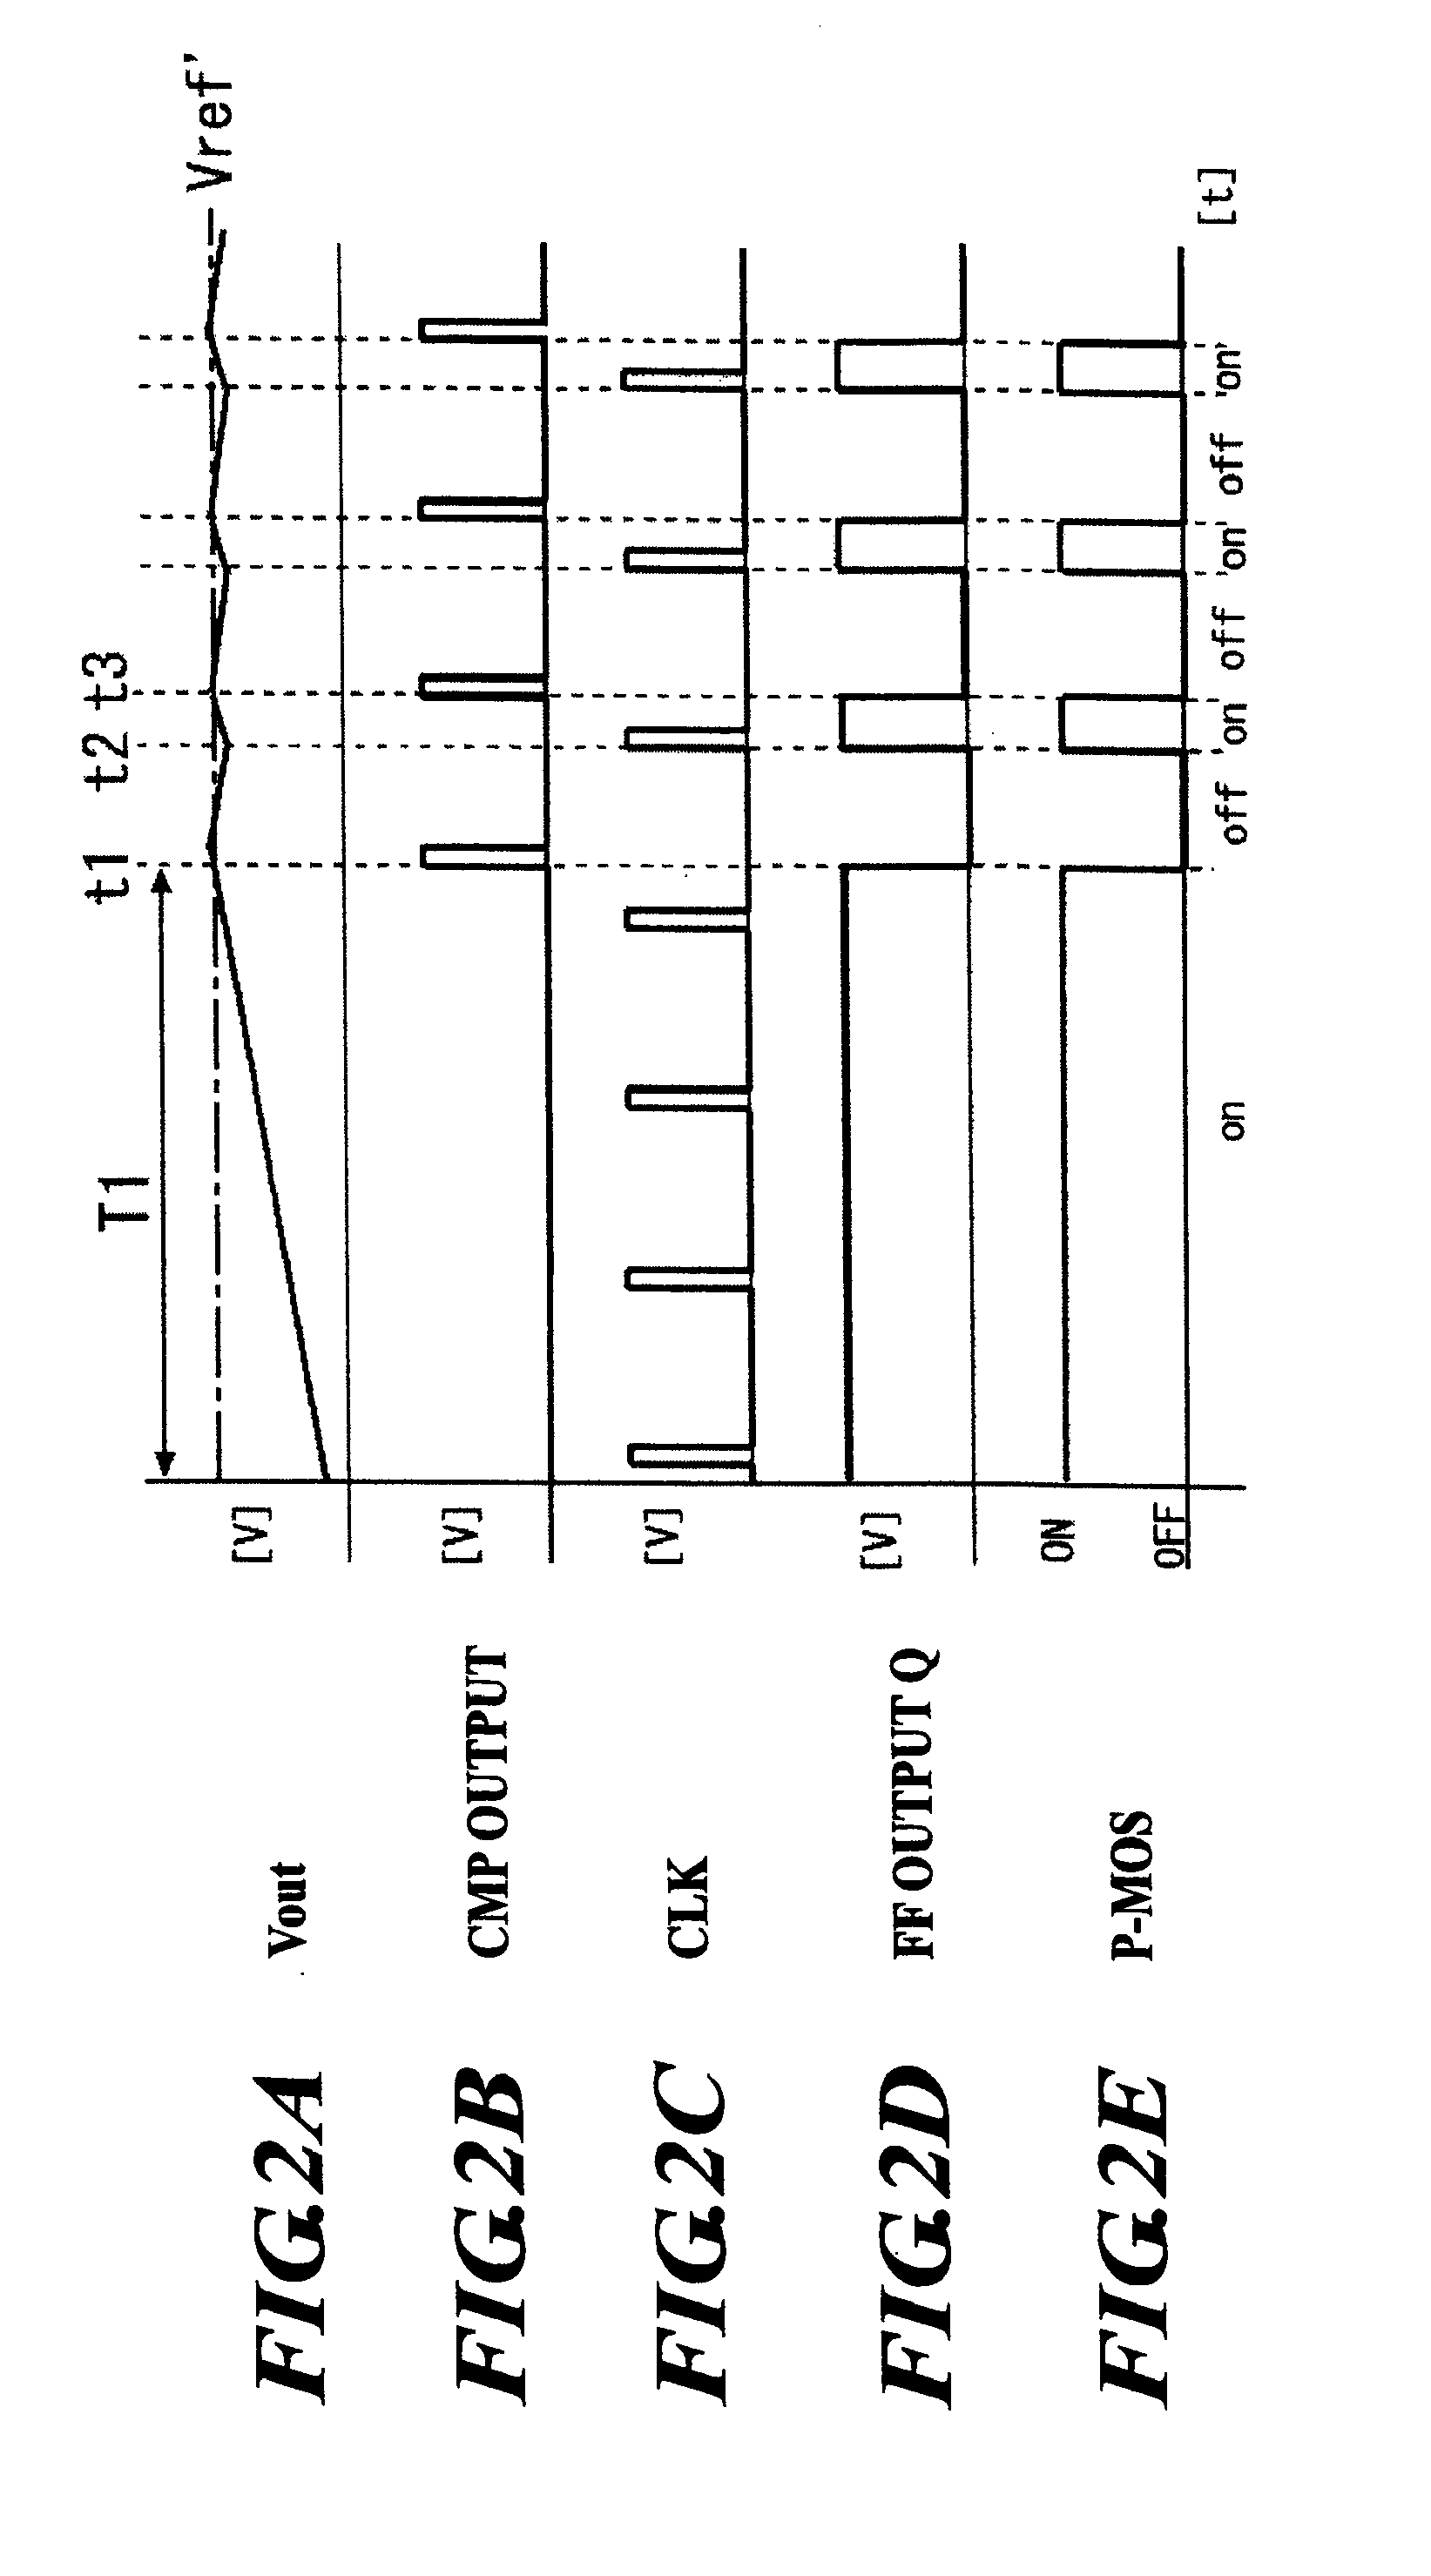 Dc-dc converter and switching control circuit